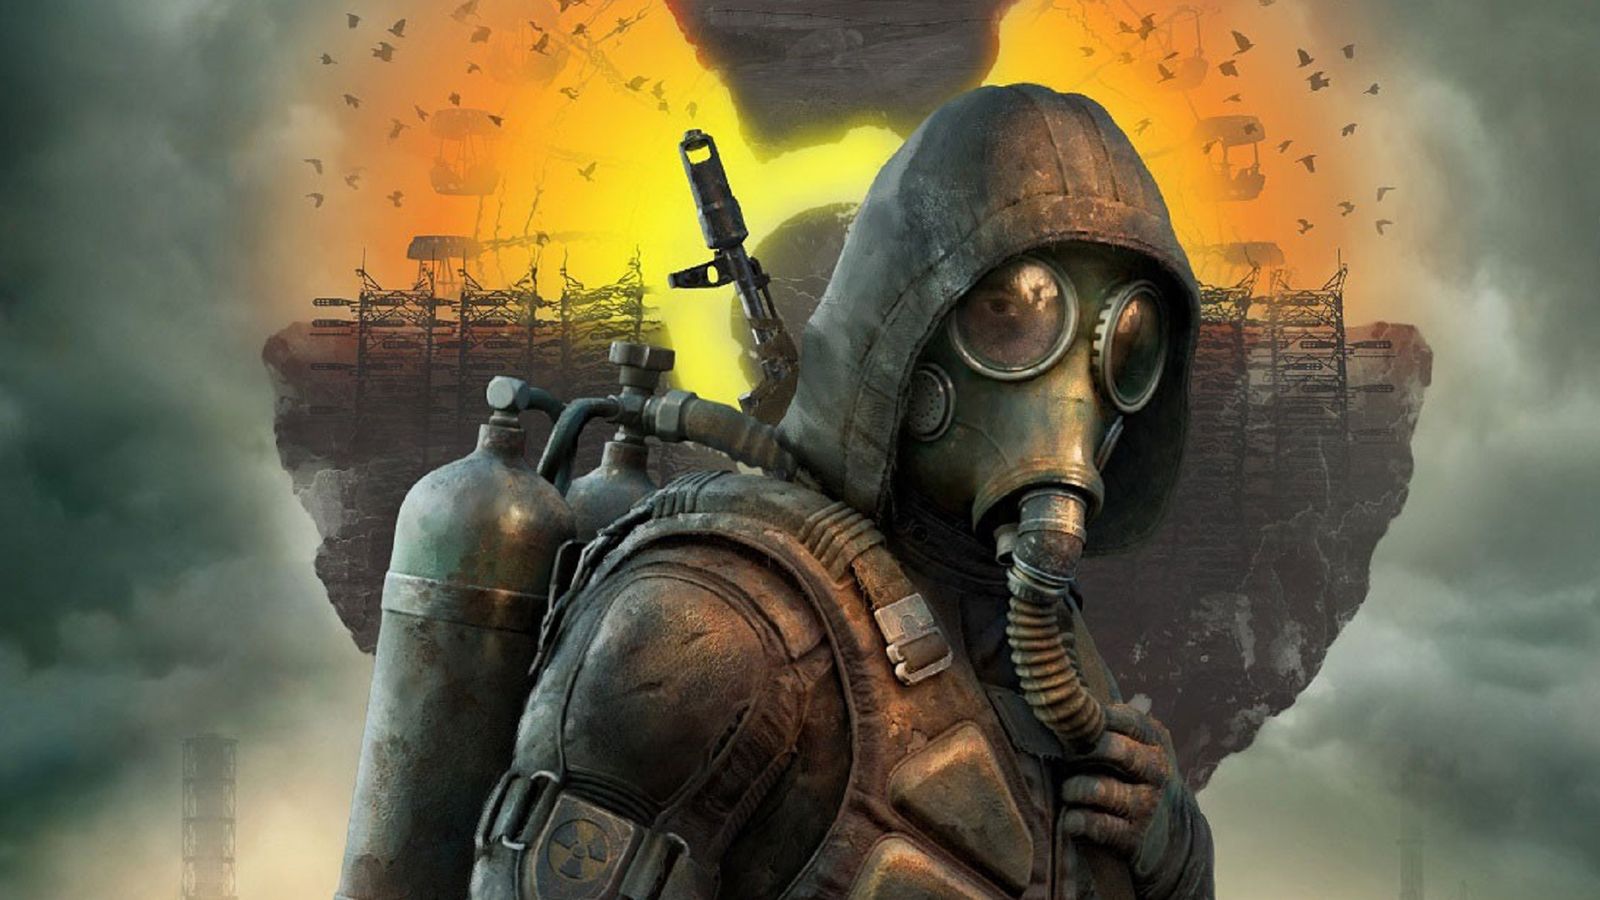 Stalker 2 playtest build has leaked but it is unplayable man with mask